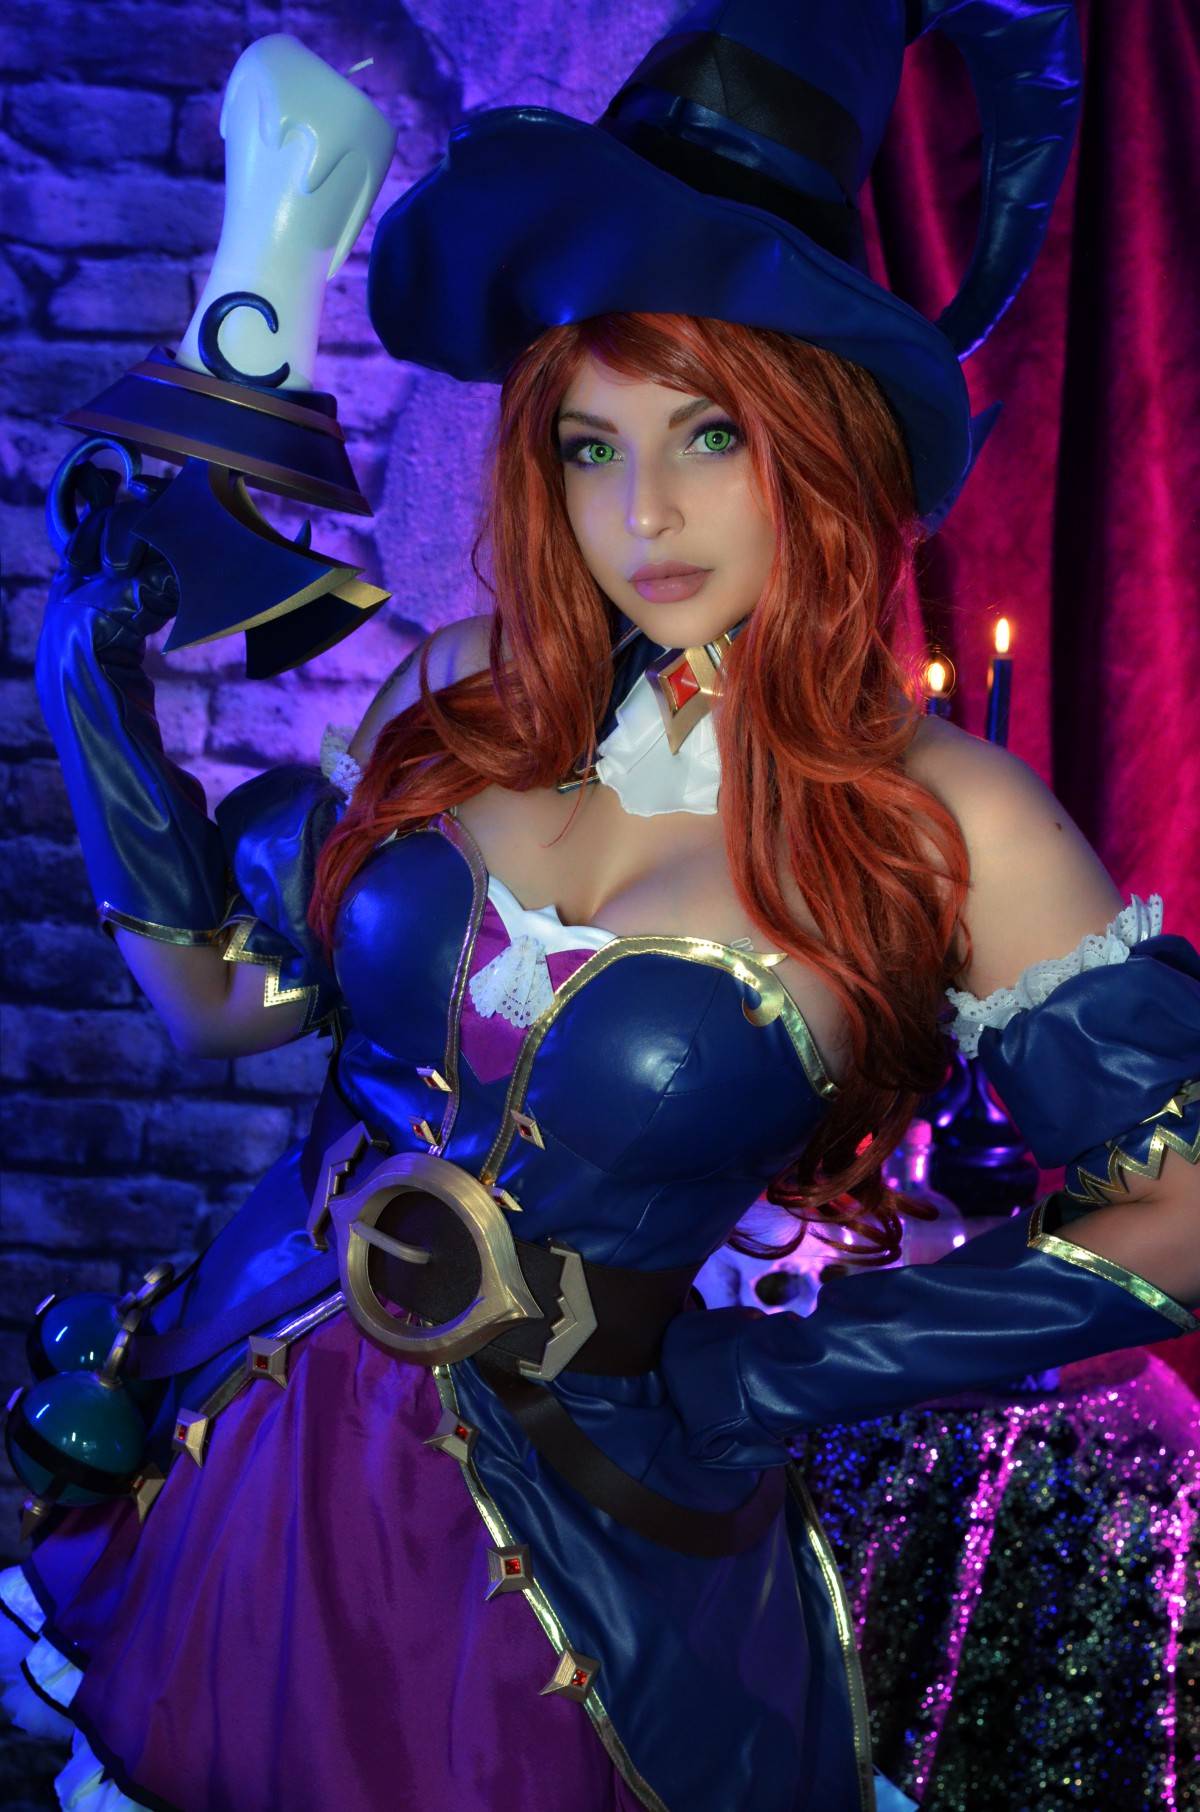 Shermie Bewitching Miss Fortune 0004 7051696480.jpg